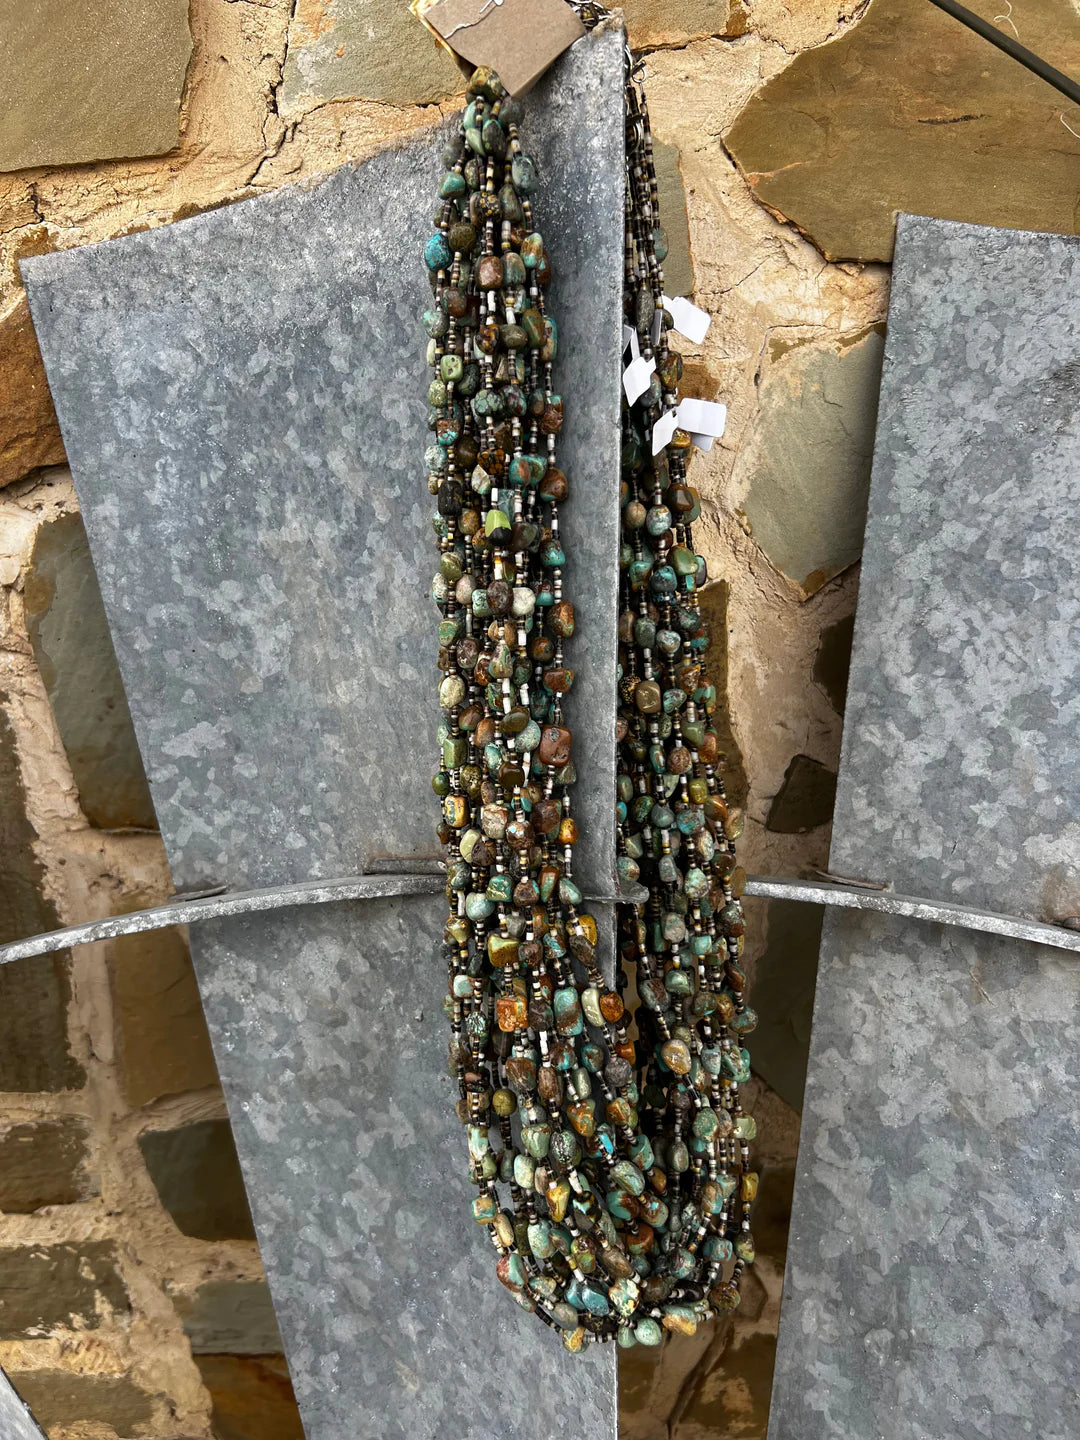 The Brock Turquoise Necklace